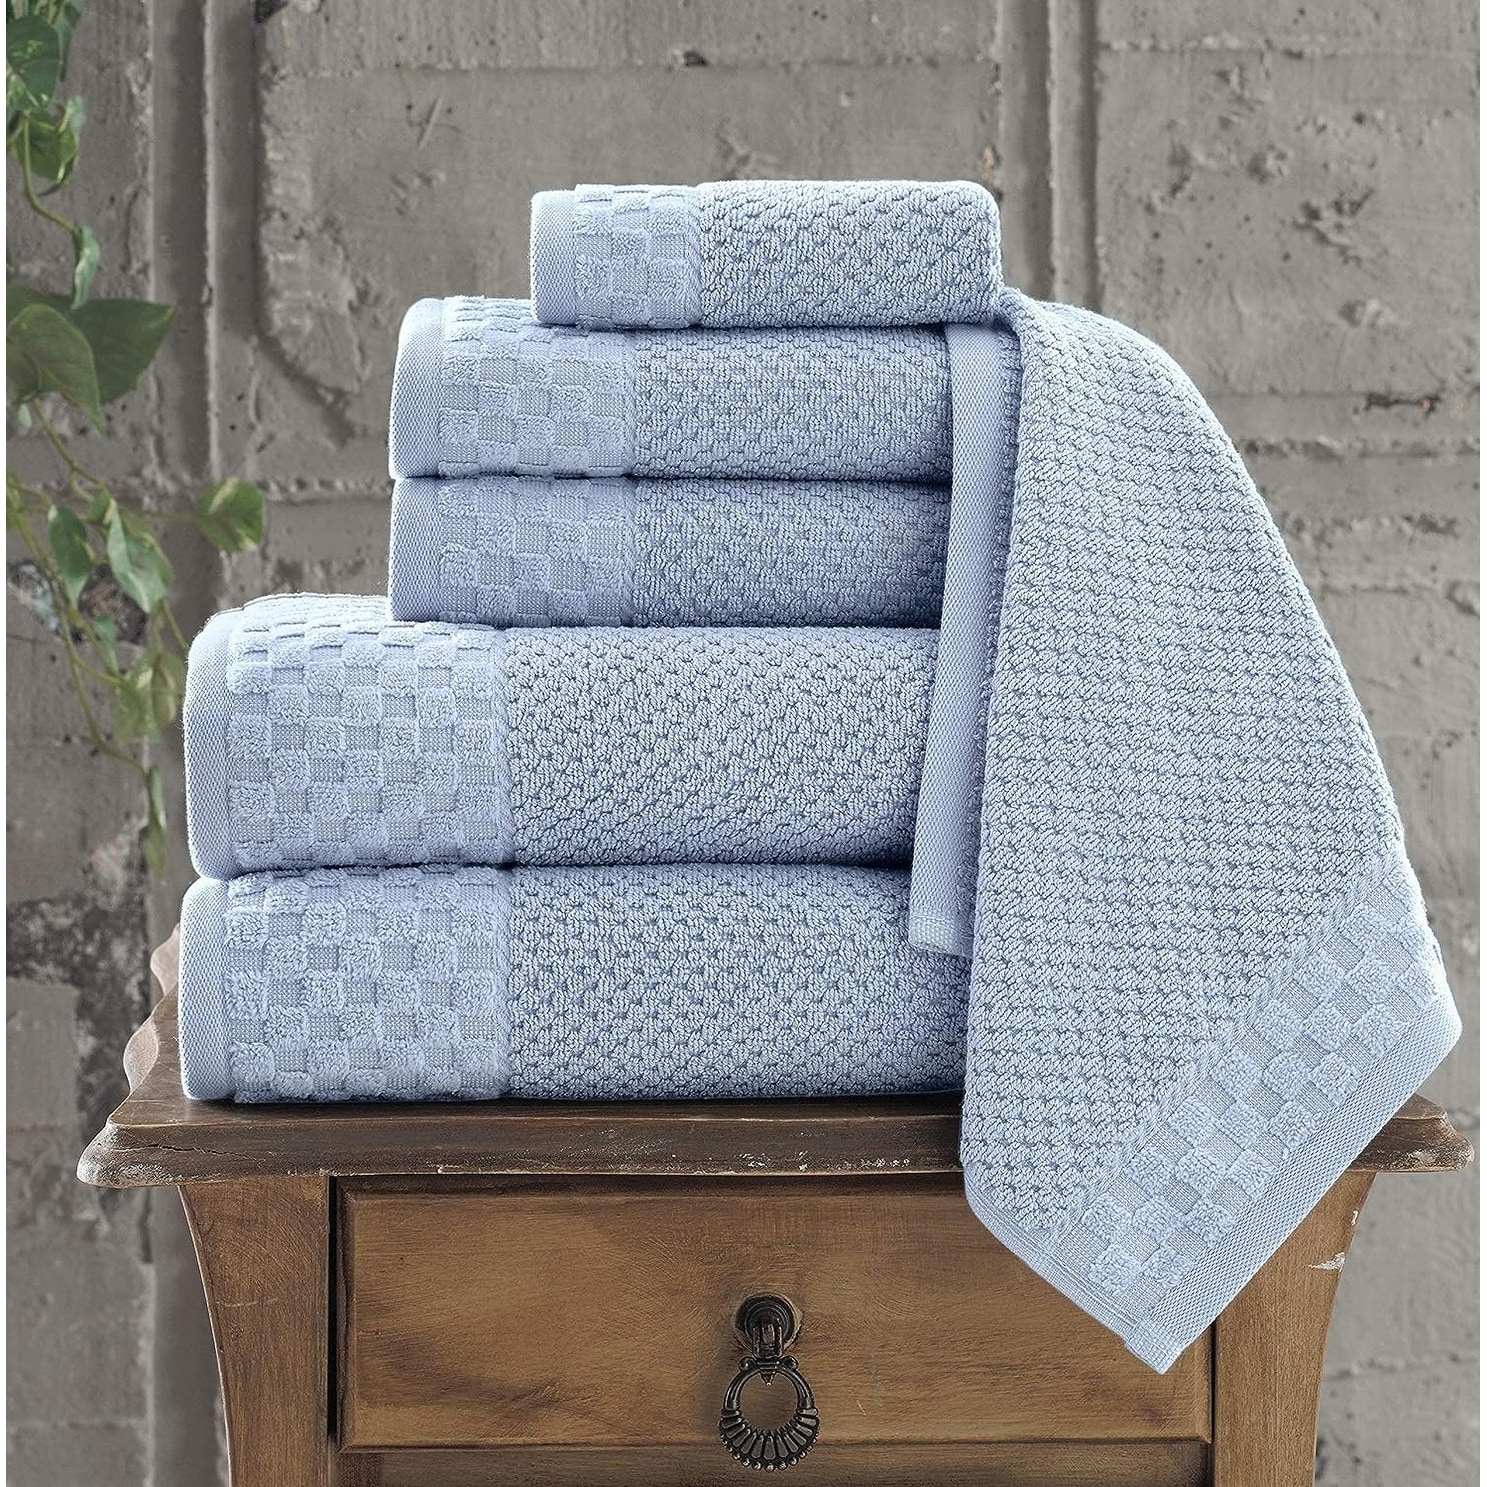 Boston Towel Collection Turkish Cotton Luxury and Soft 2 Large